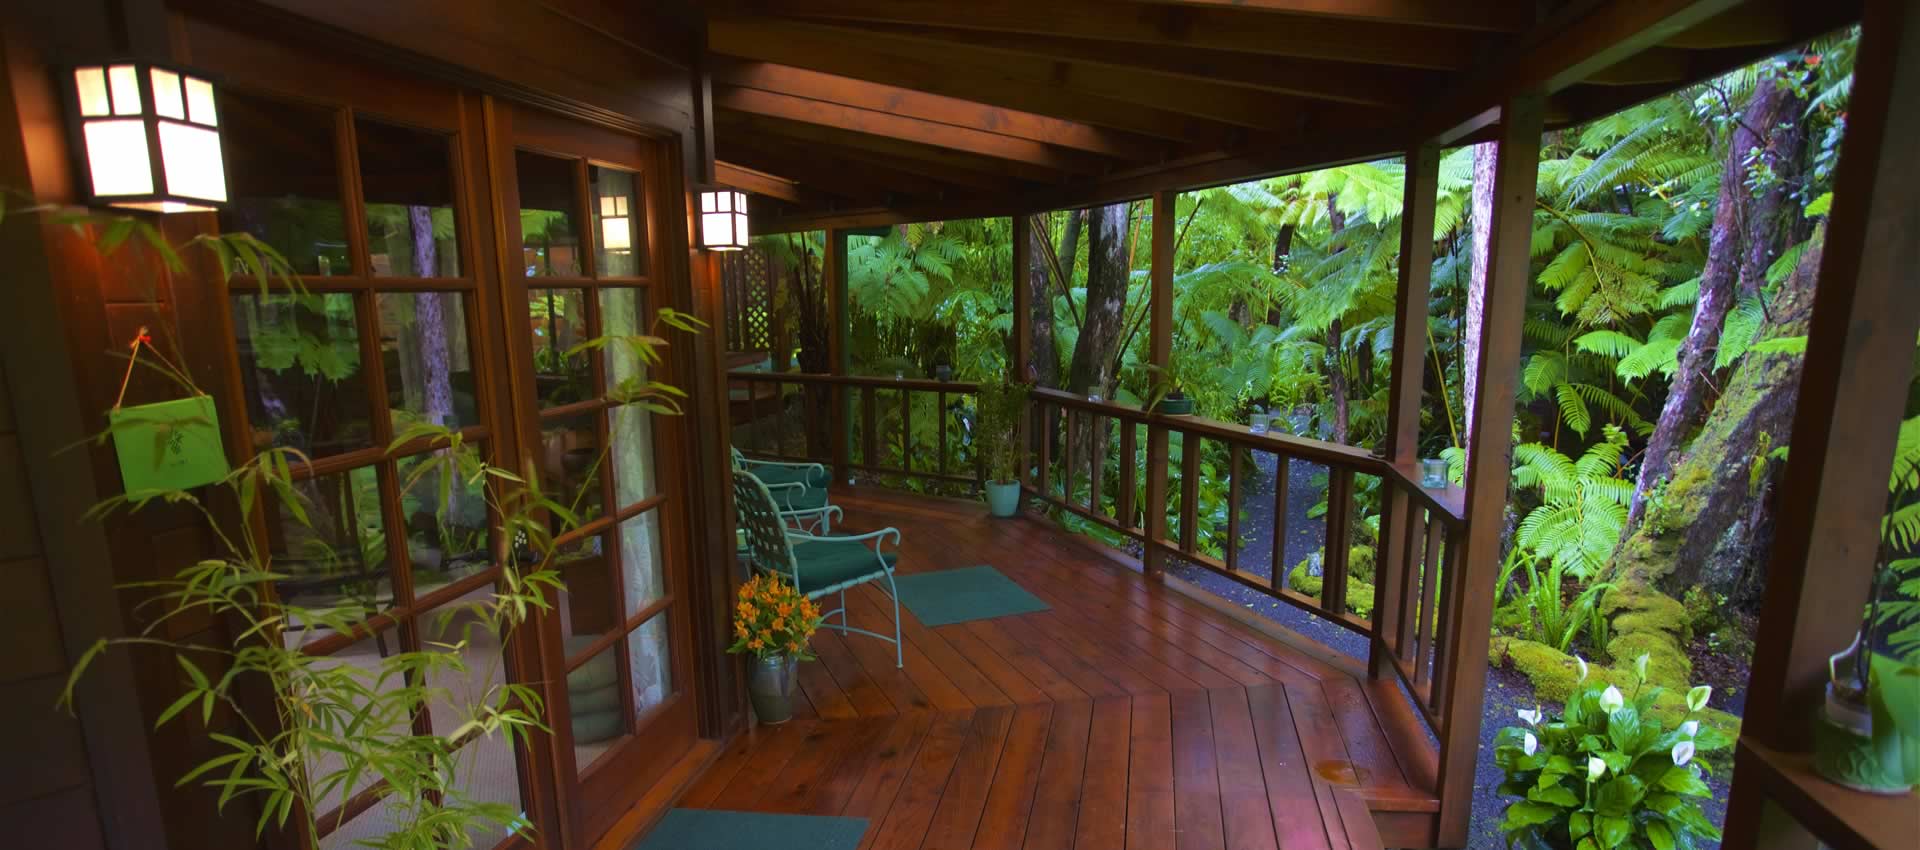 Front Deck of the Skylight House surrounded by tropical rain forest